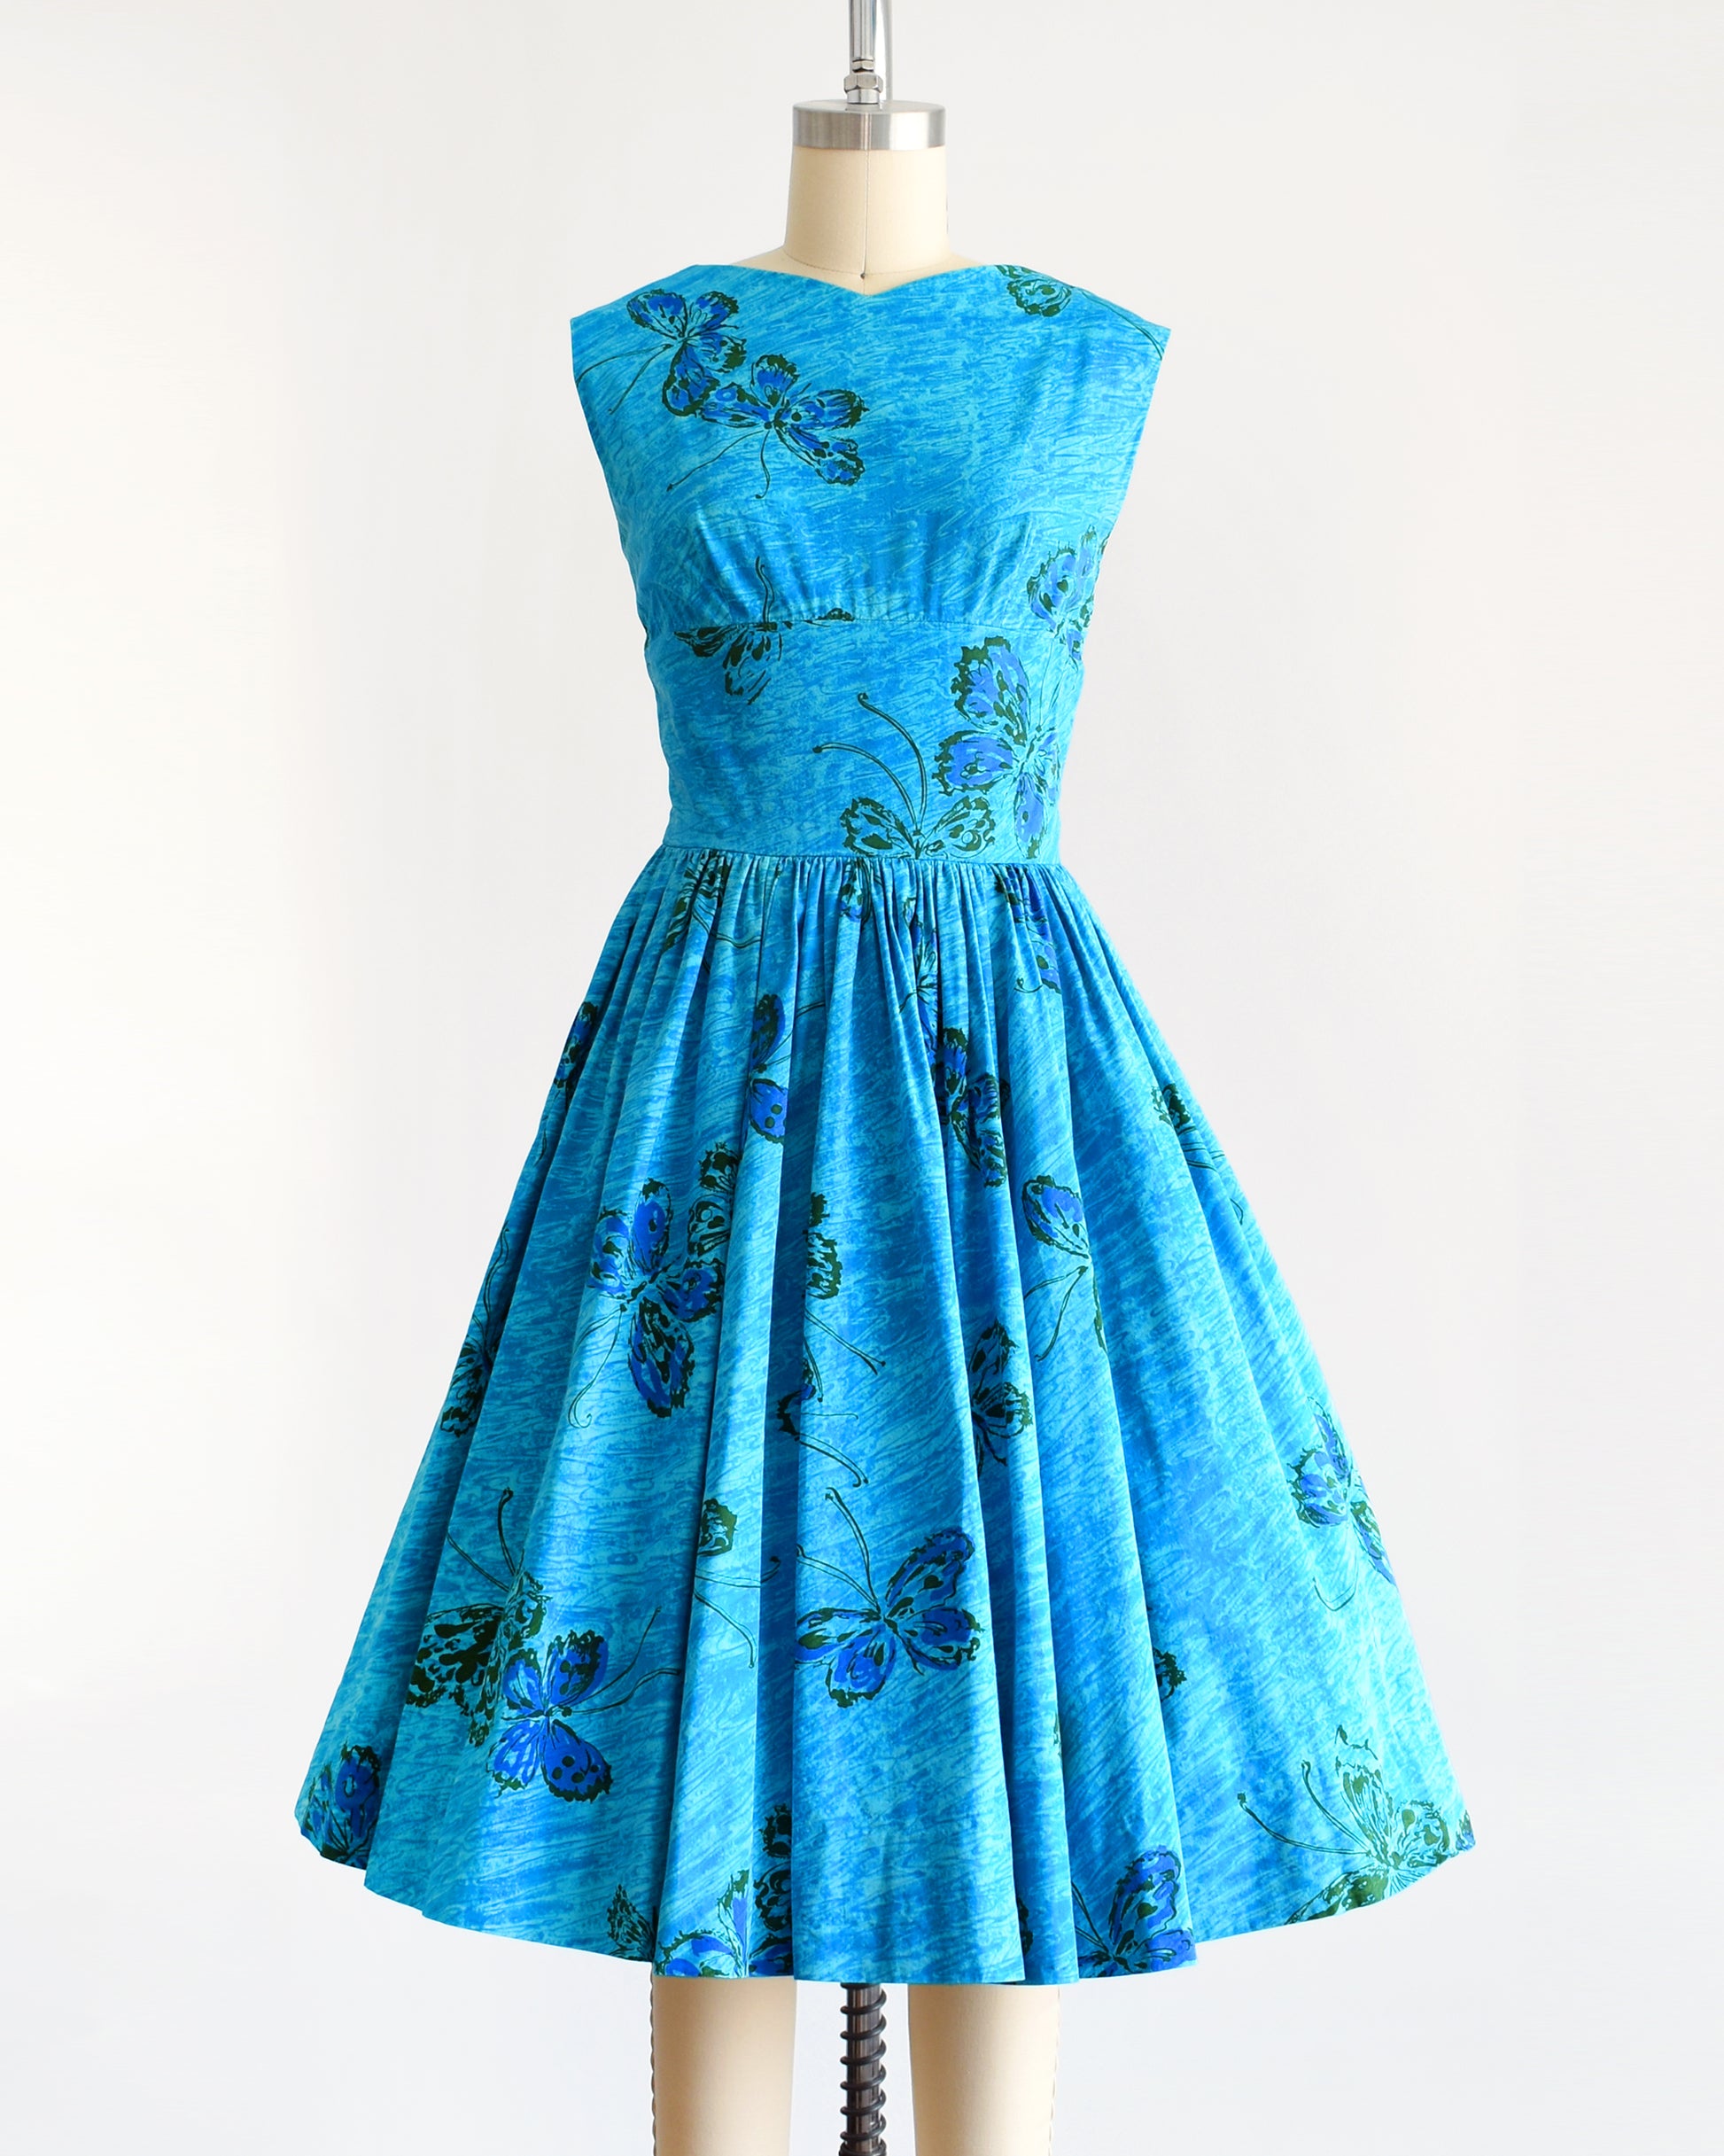 A vintage 1950s Anne Fogarty blue fit and flare dress that has a butterfly print. The dress is on a dress form.